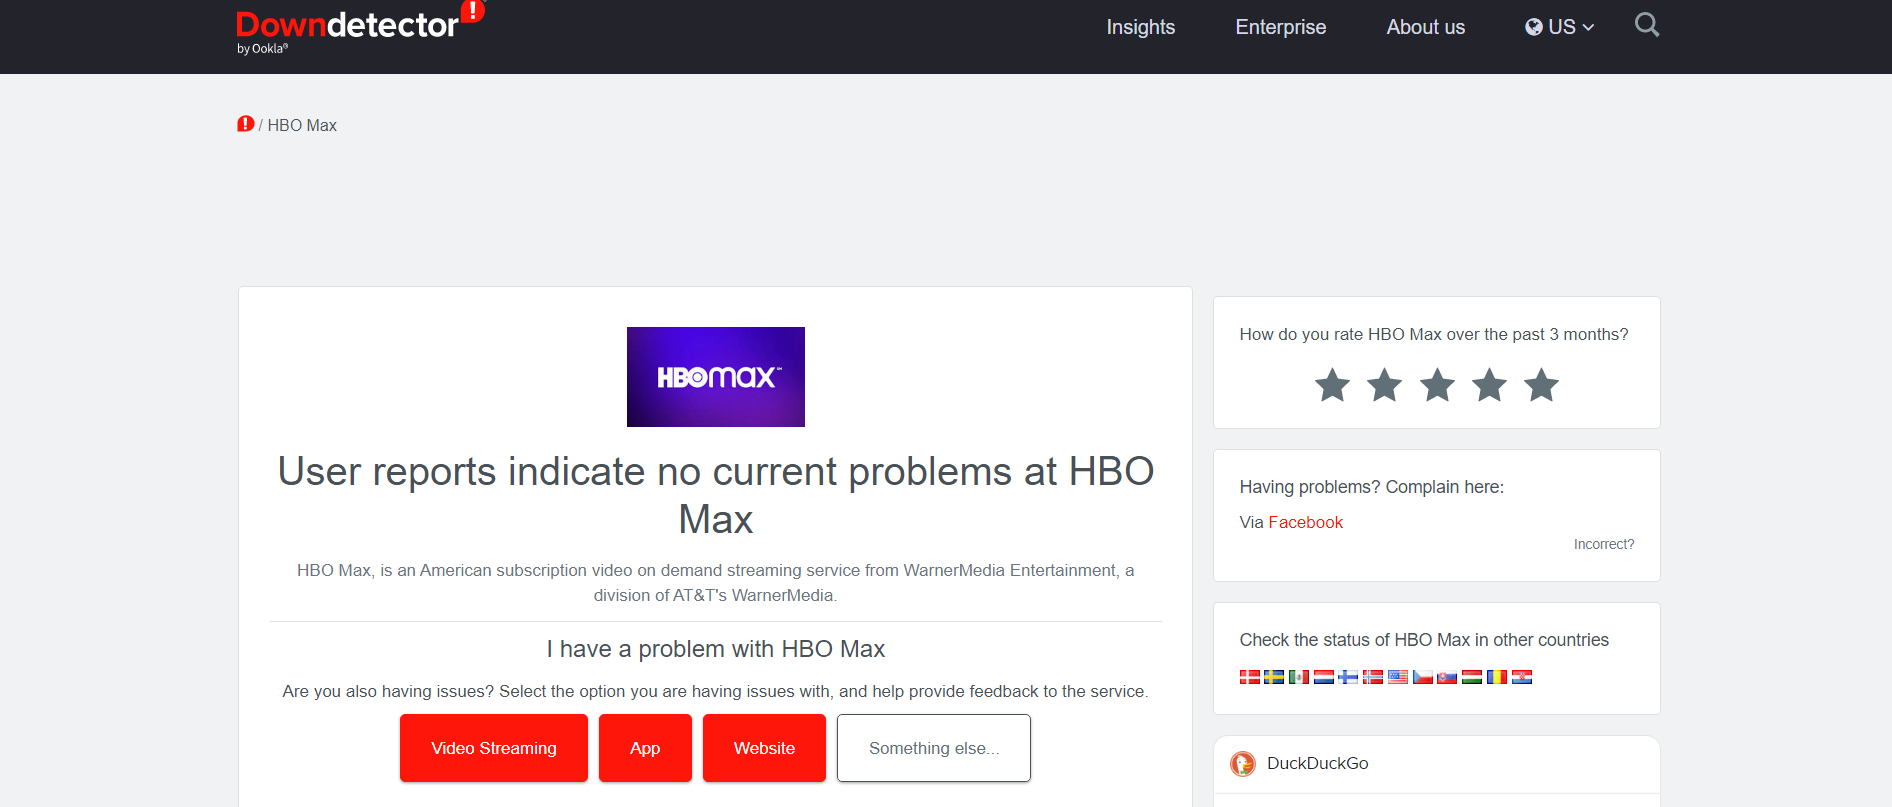 HBO Max Down detector page